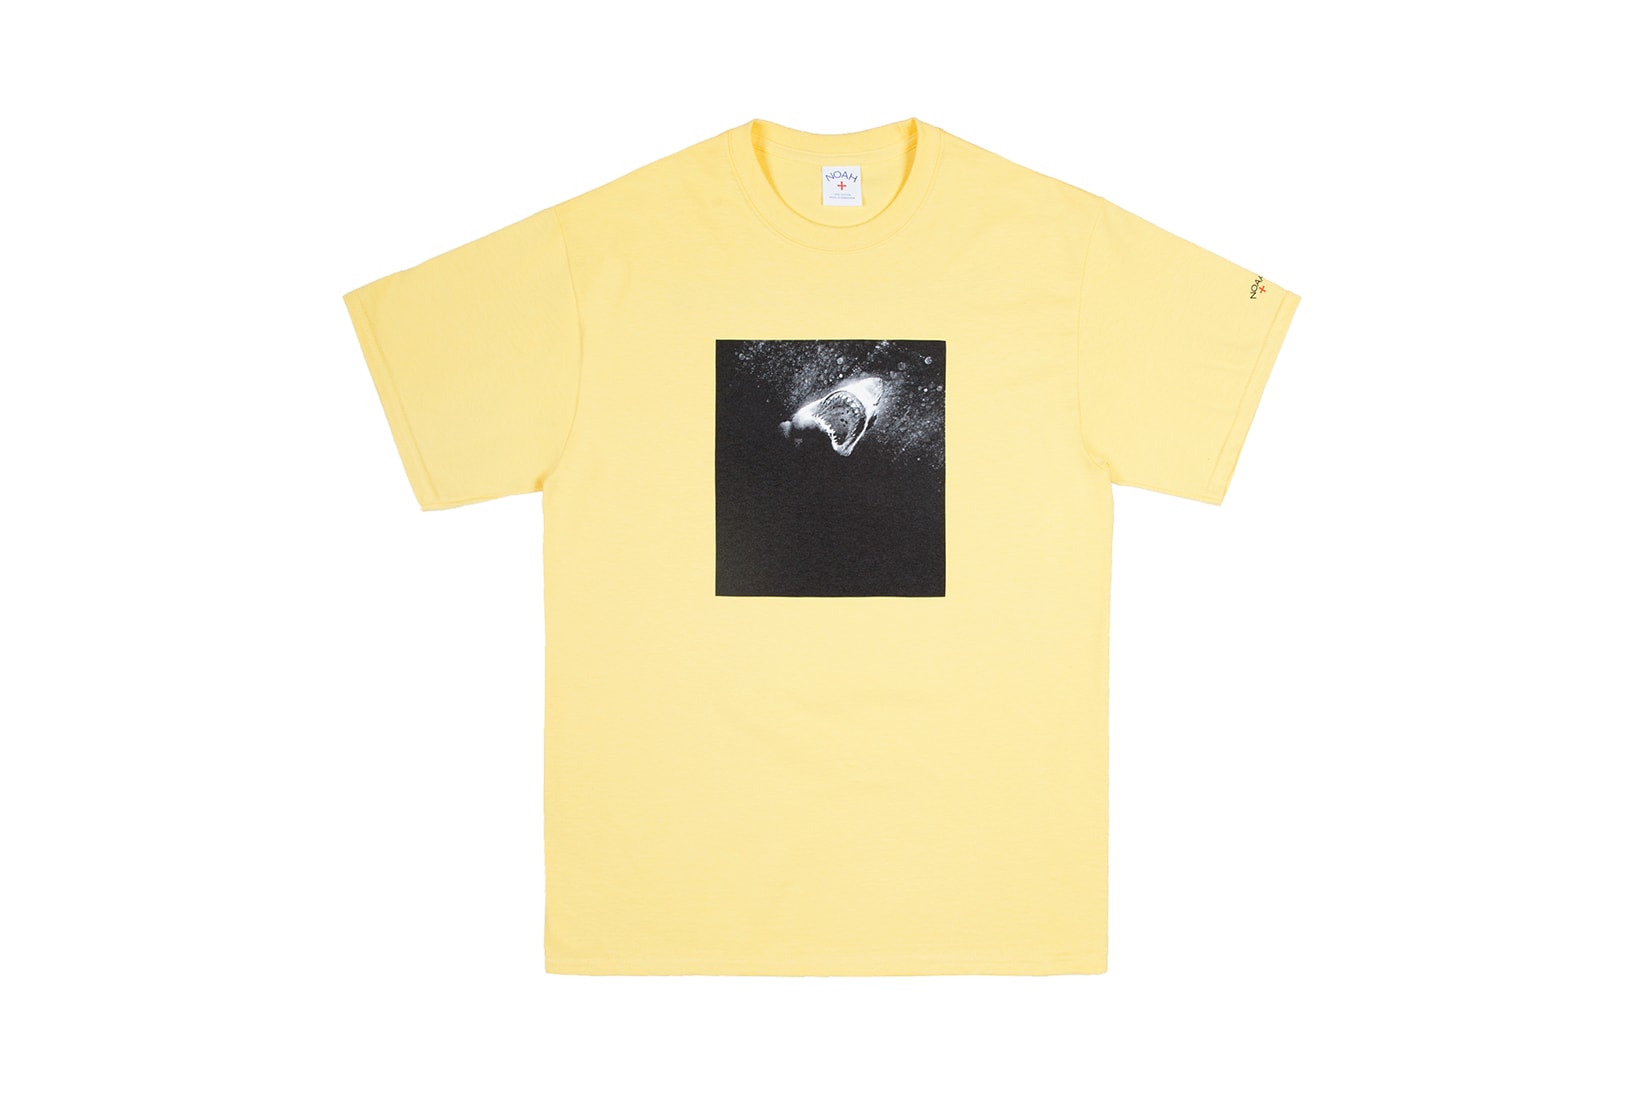 Noah x Michael Muller Collection Available Purchase Buy Dover Street Market London Instore Online Photo Exhibition May 17 Photo Book Limited Edition Tees T-Shirts Shark